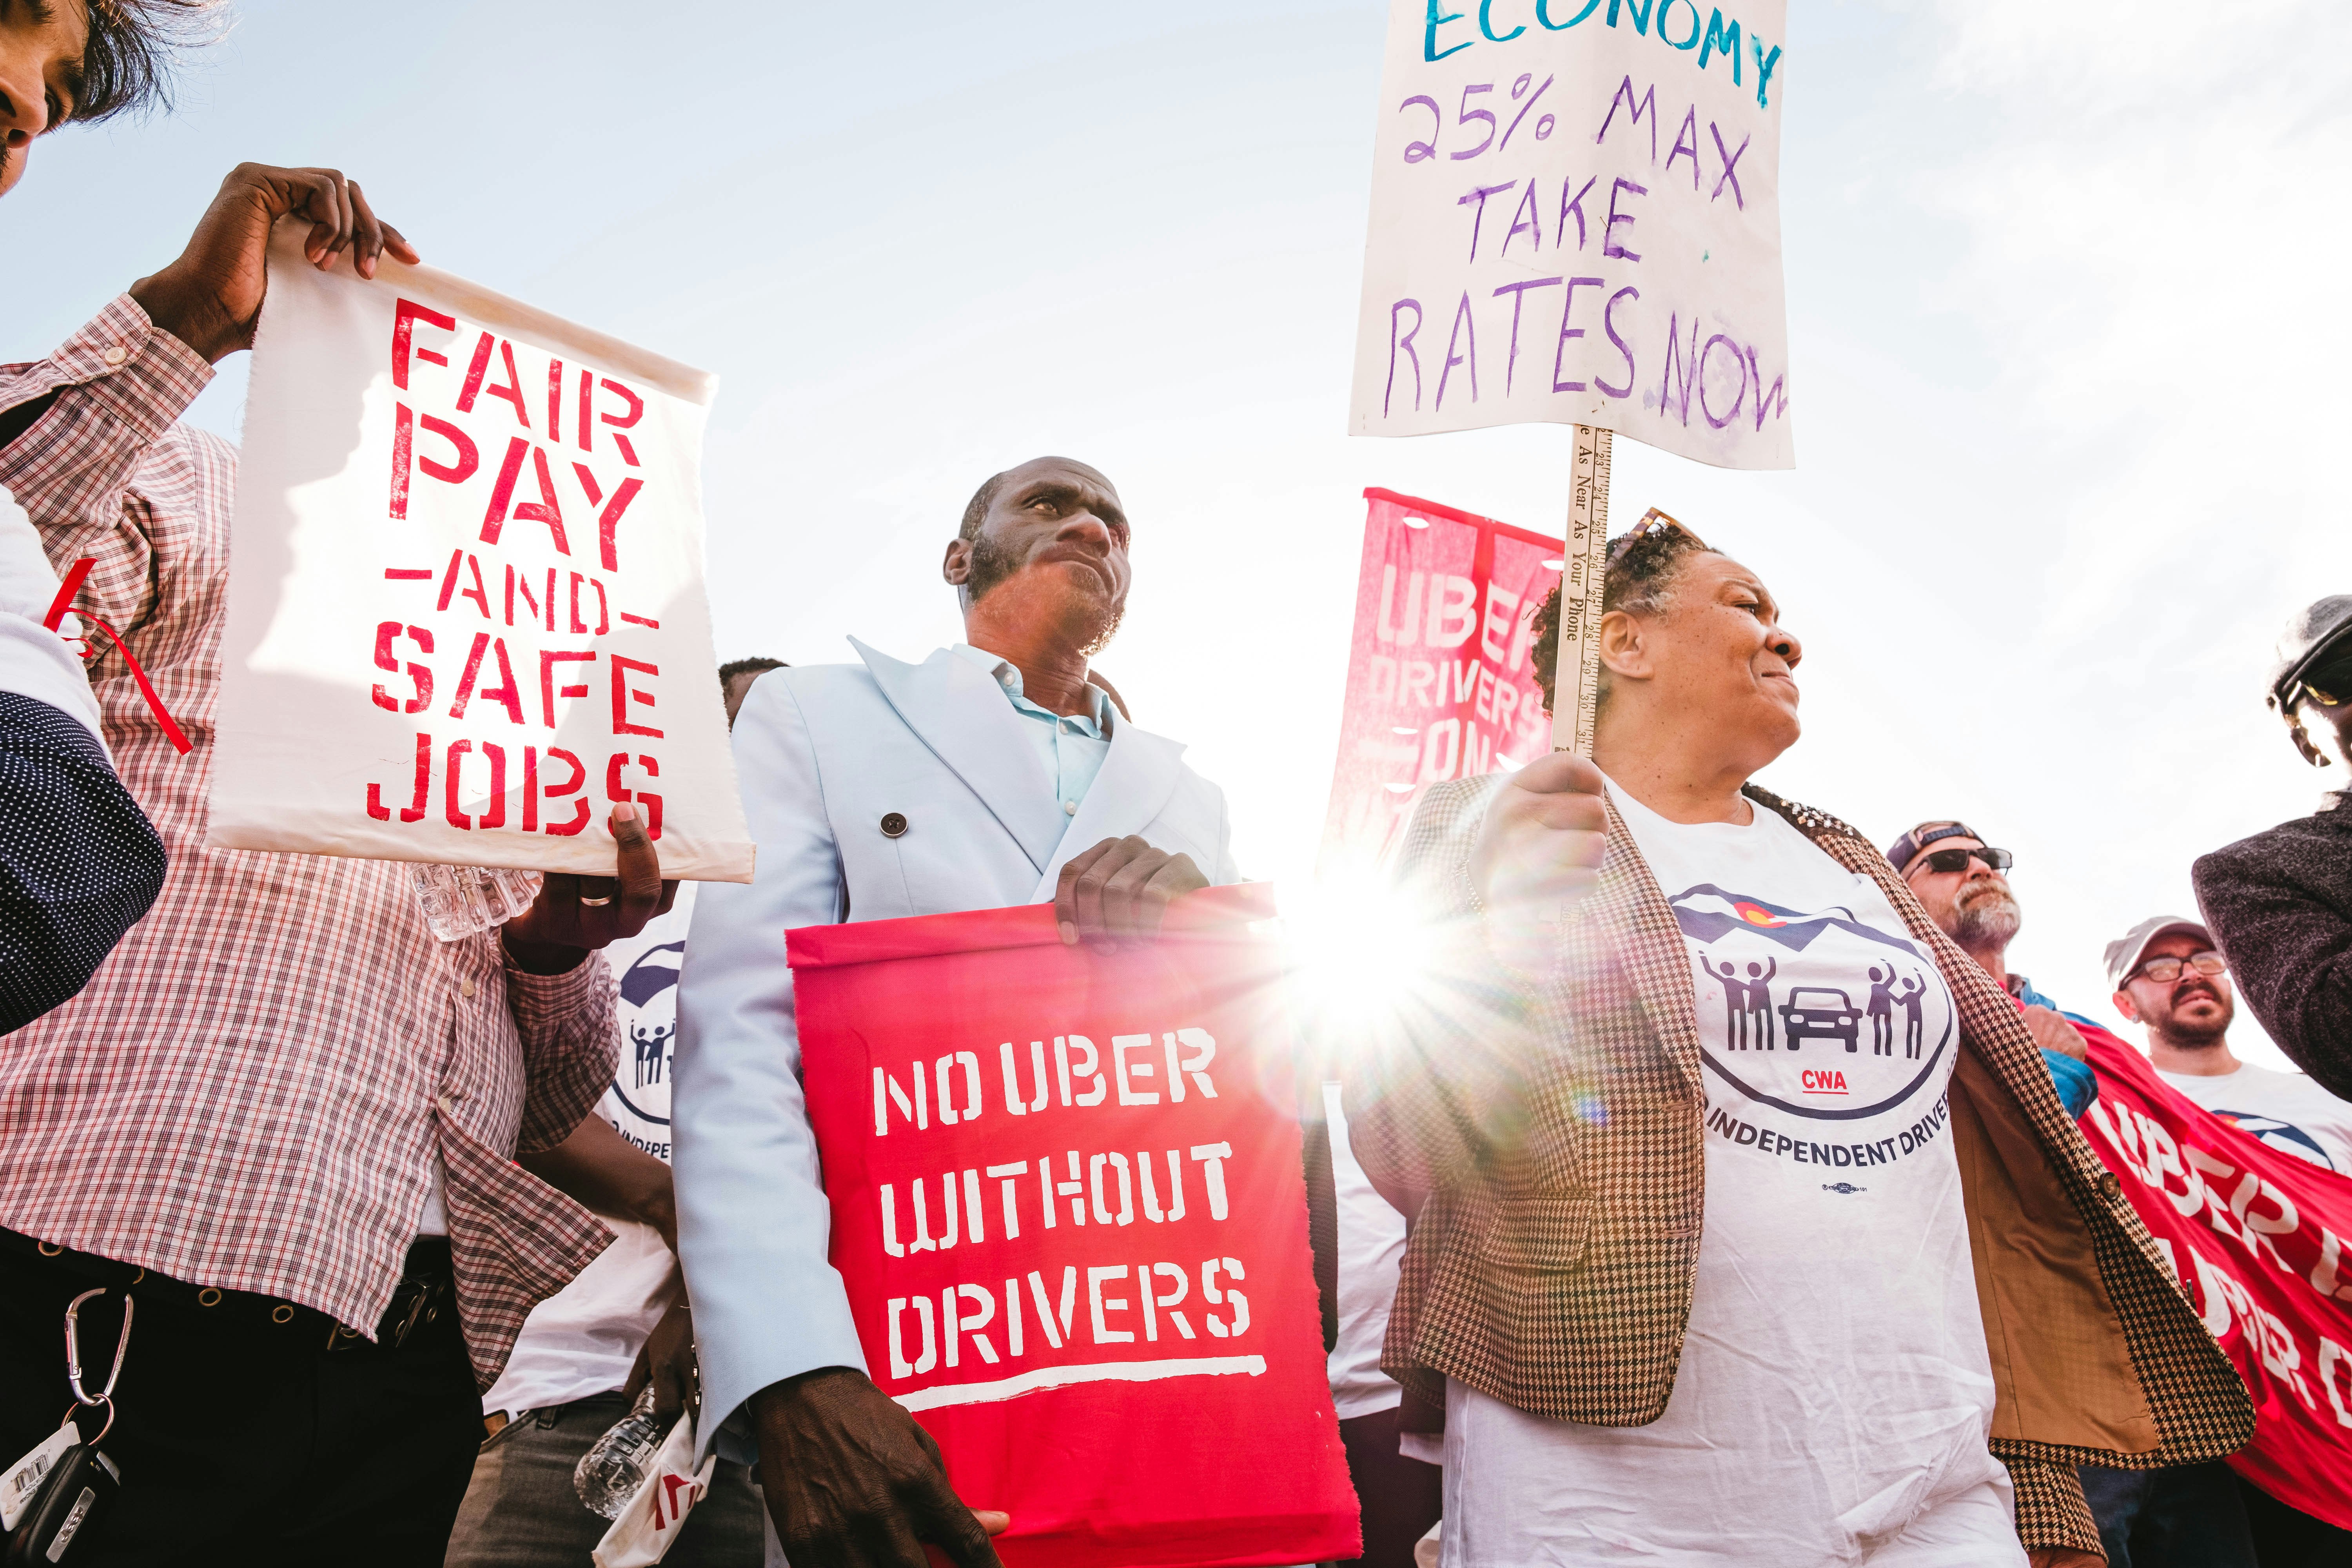 Uber drivers and allies rallying with Colorado Independent Drivers United and PowerSwitch Action at Denver Intl Airport on 5/4/23. People holding signs that say "No Uber Without Drivers" and "Fair Pay and Safe Jobs"